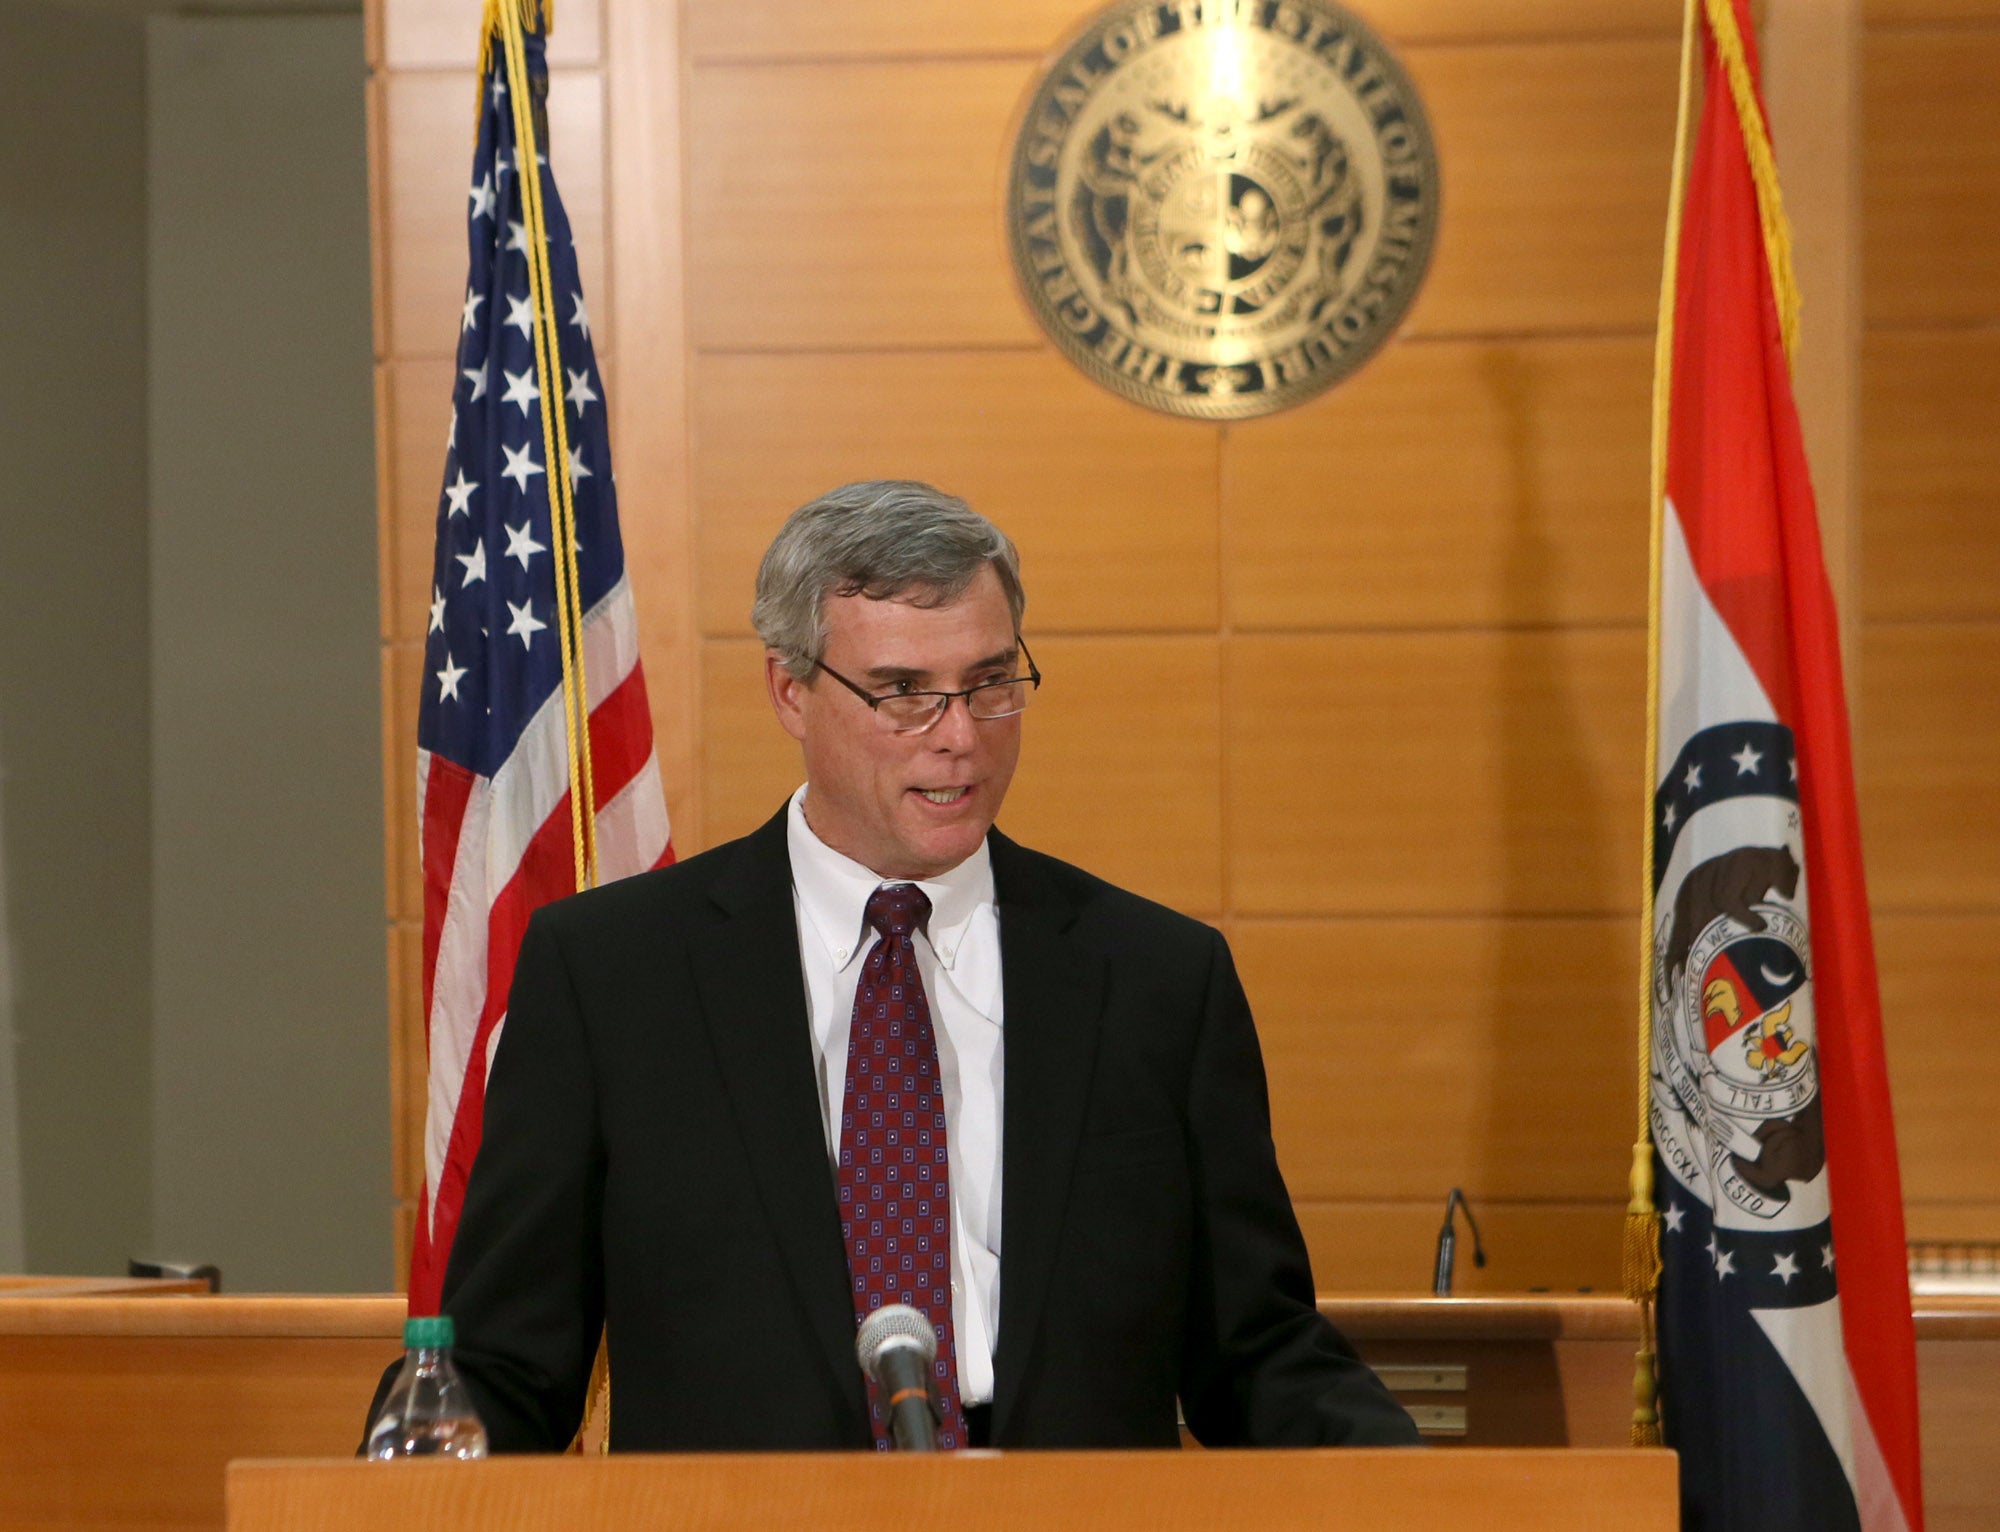 Questions Raised About Prosecutor McCulloch's Grand Jury Tactics